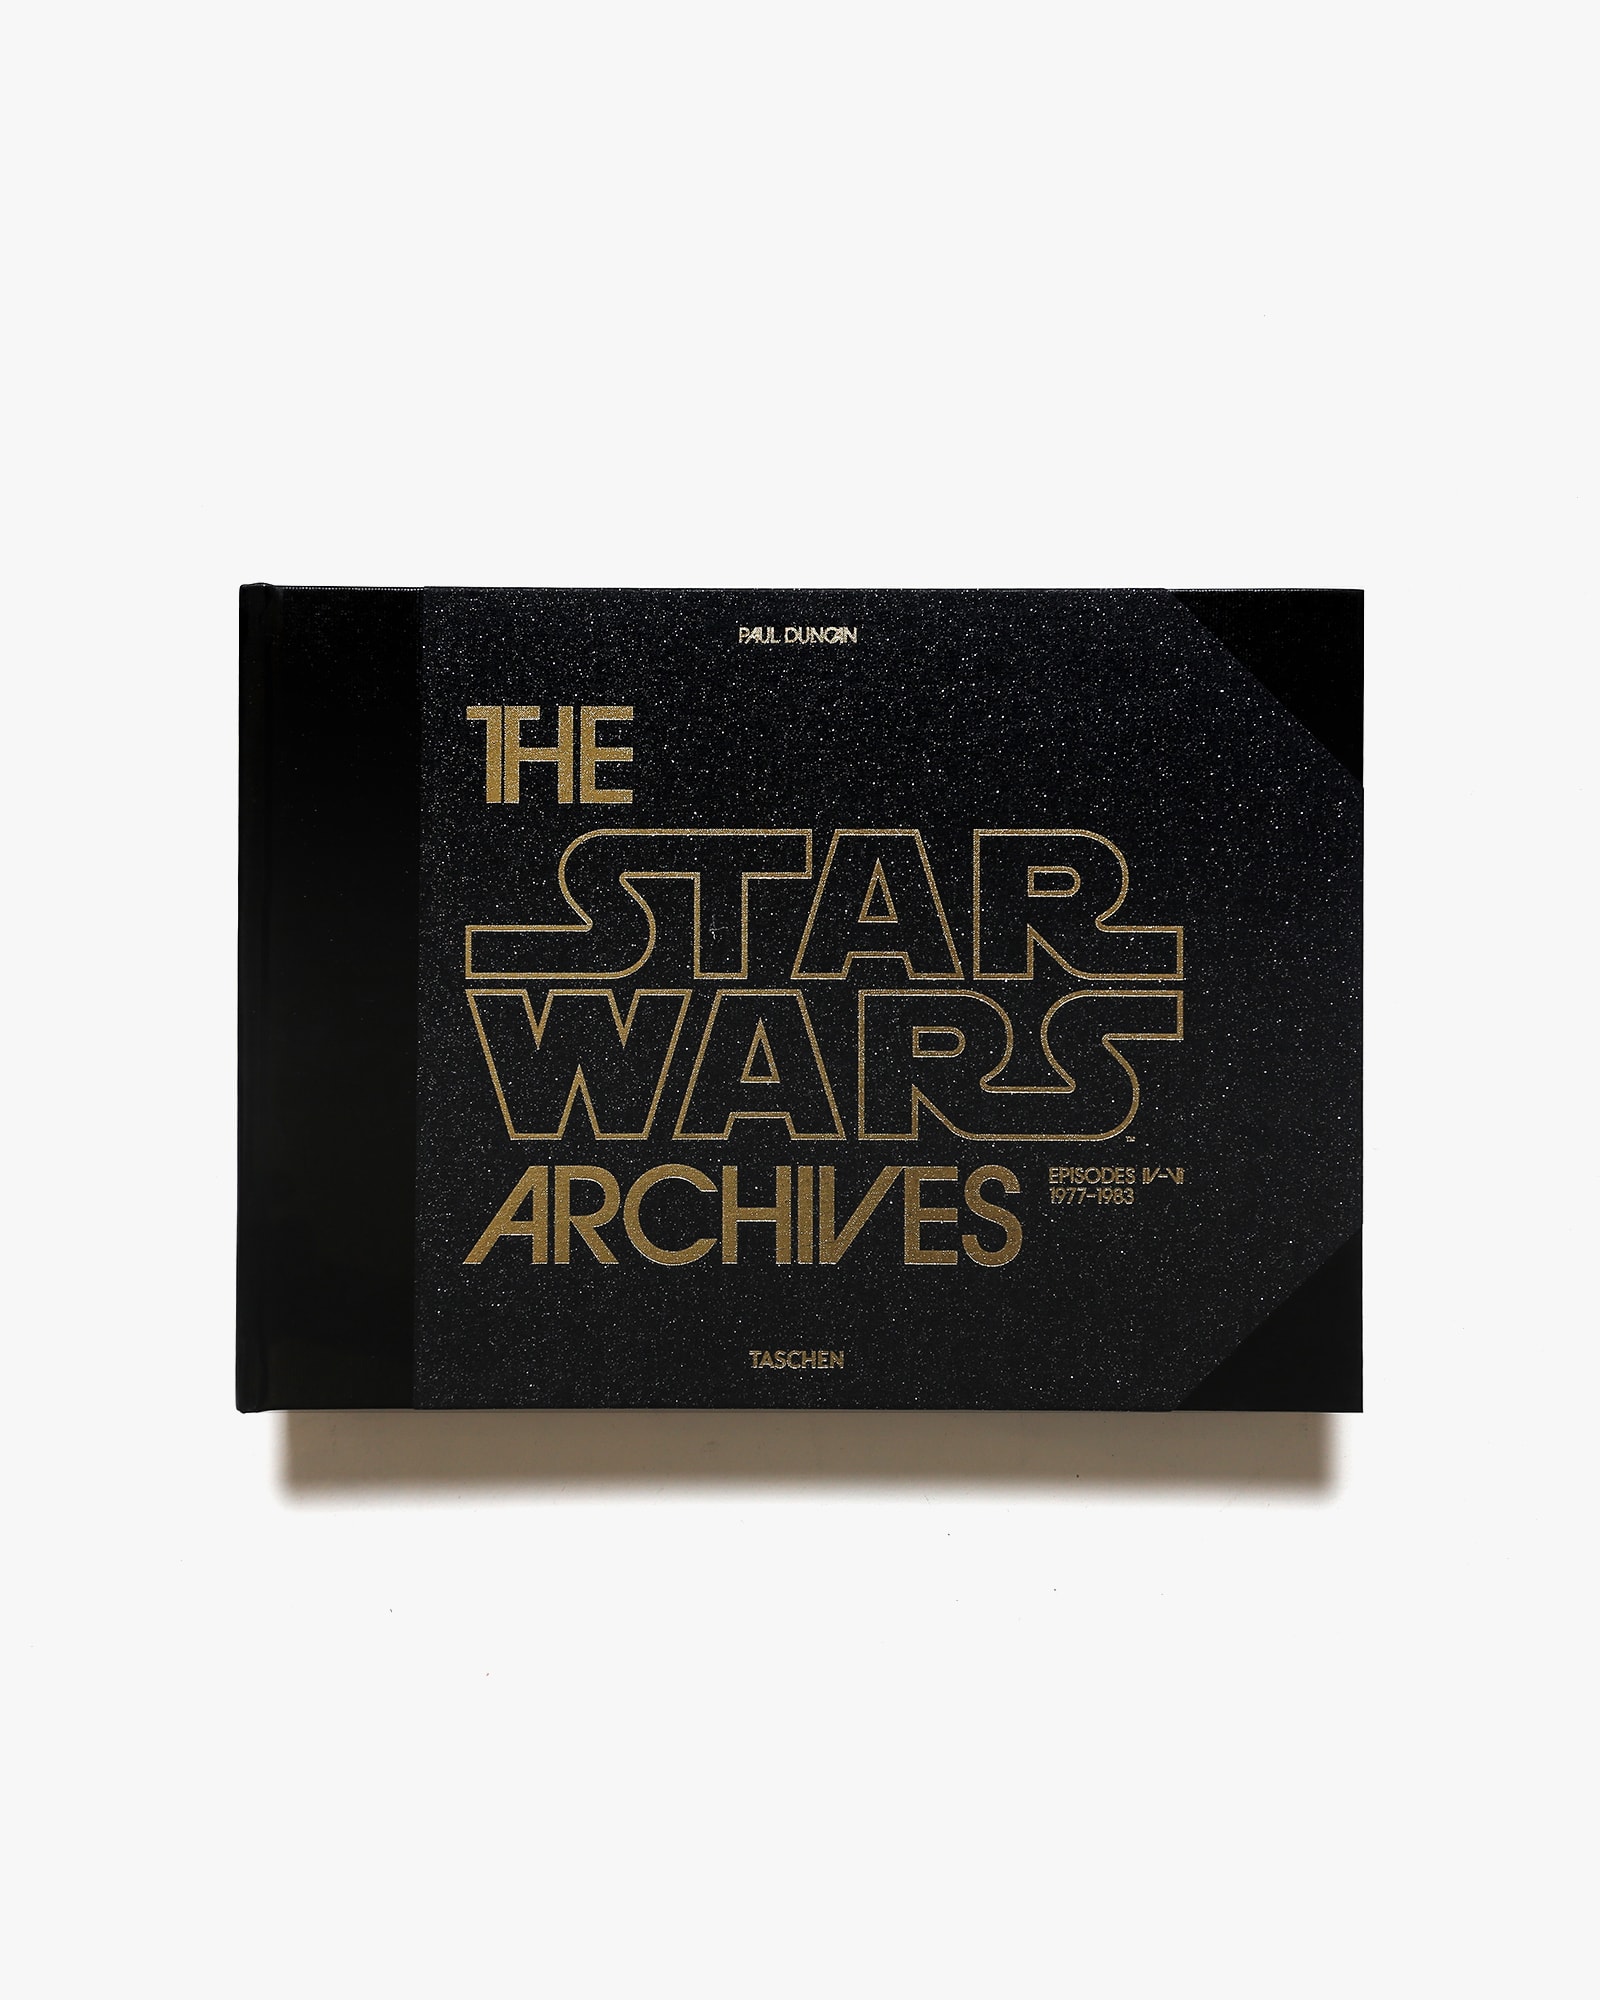 The Star Wars Archives 1977-1983